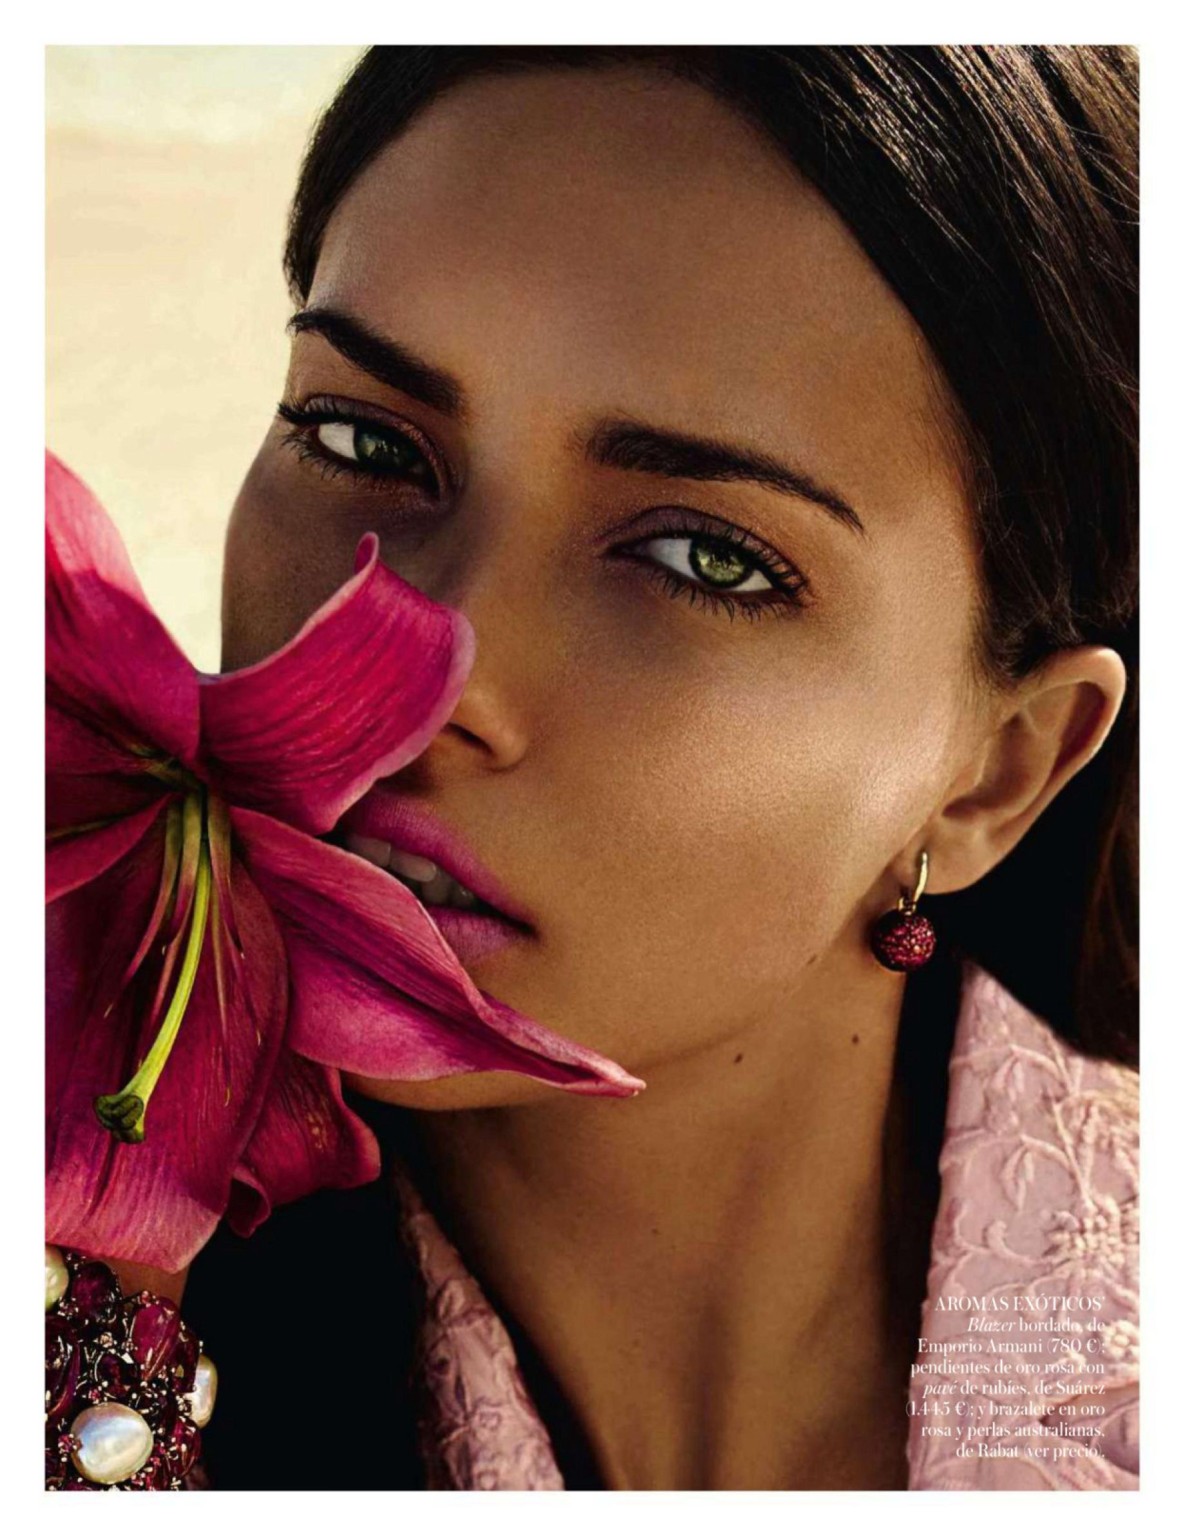 Adriana Lima looking very hot in Vogue Spain photoshoot